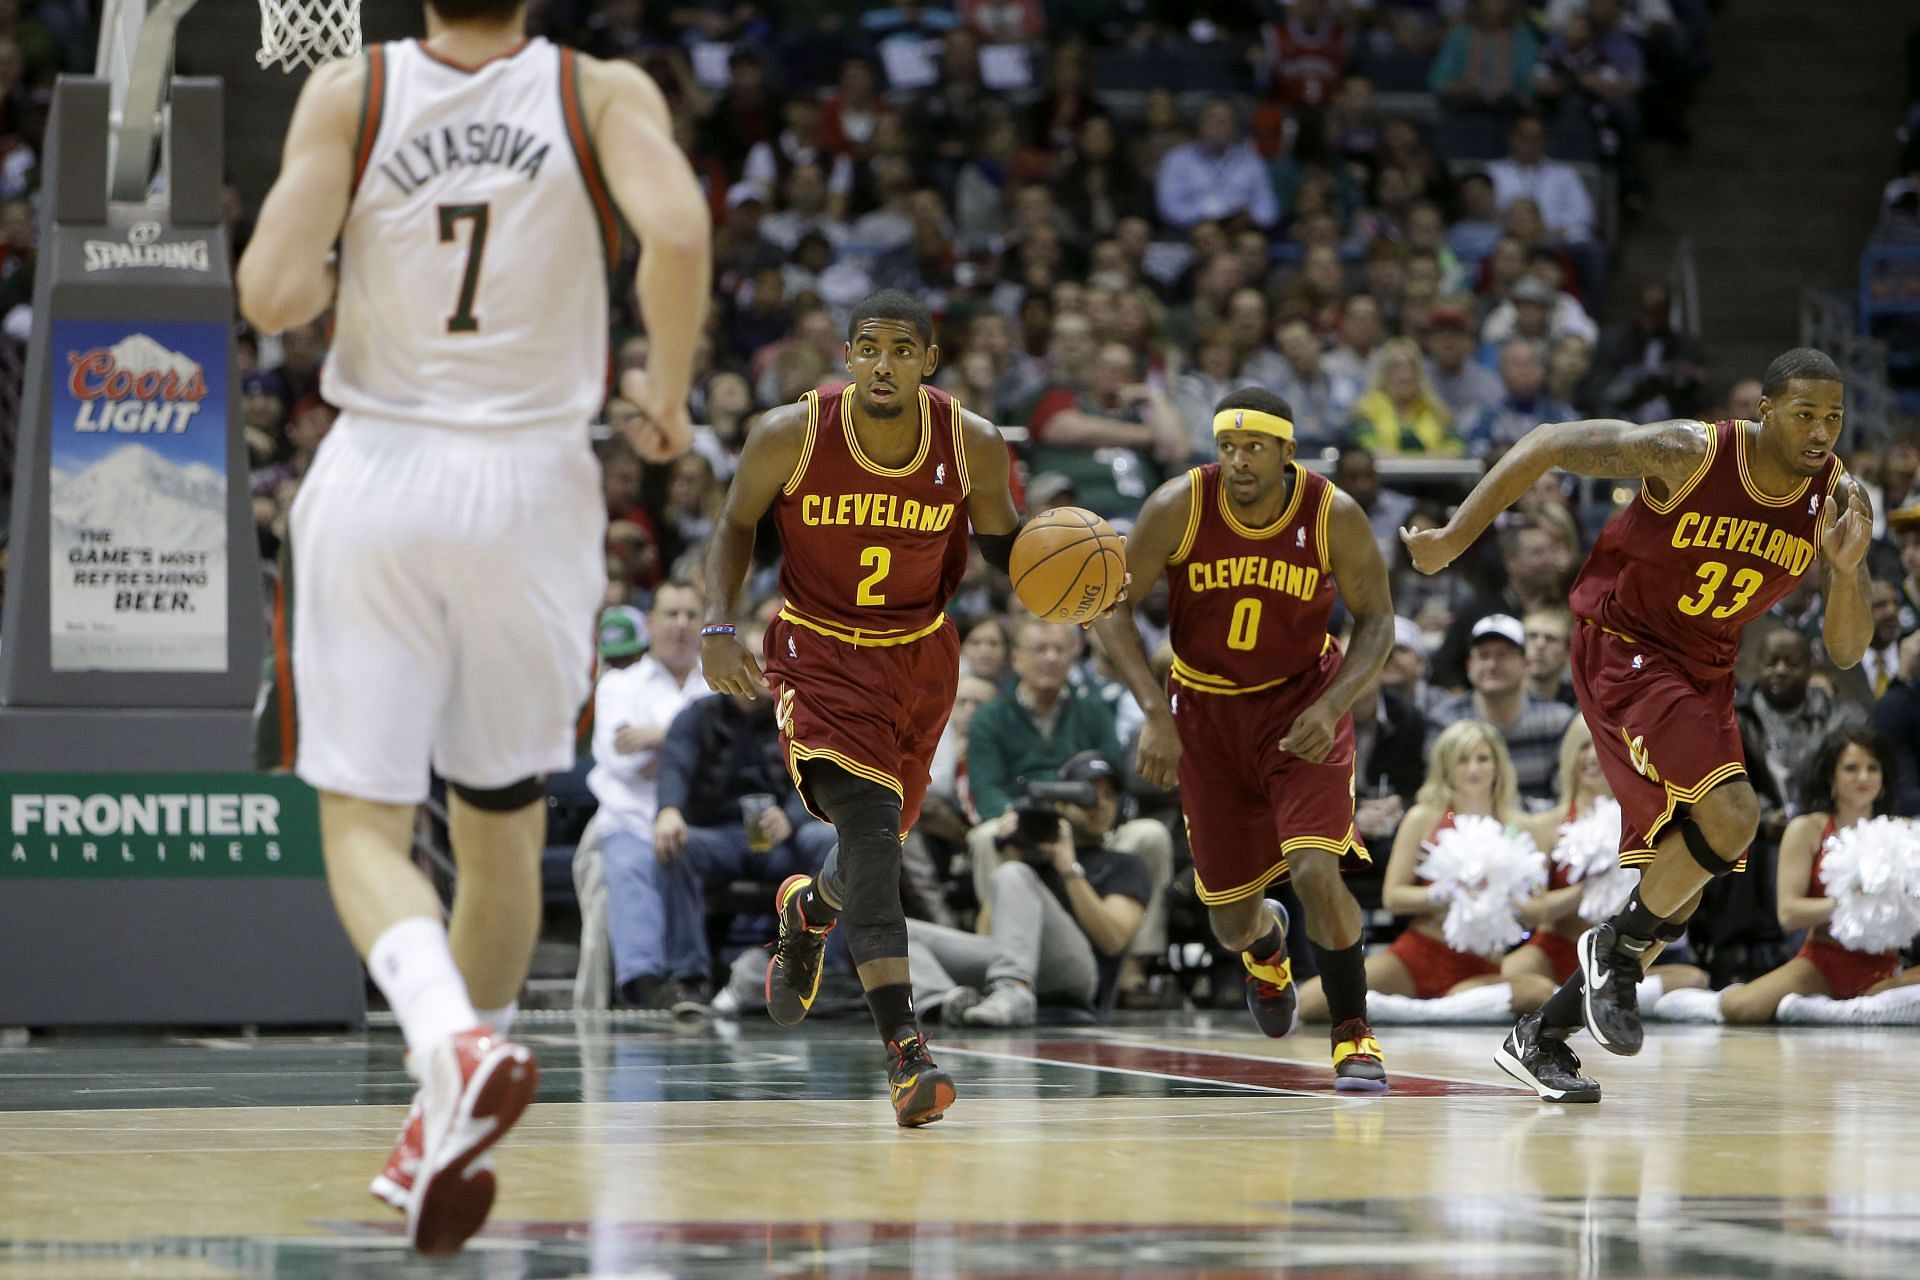 Kyrie Irving (#2) of the Cleveland Cavaliers dribbles up the court during the game against the Milwaukee Bucks